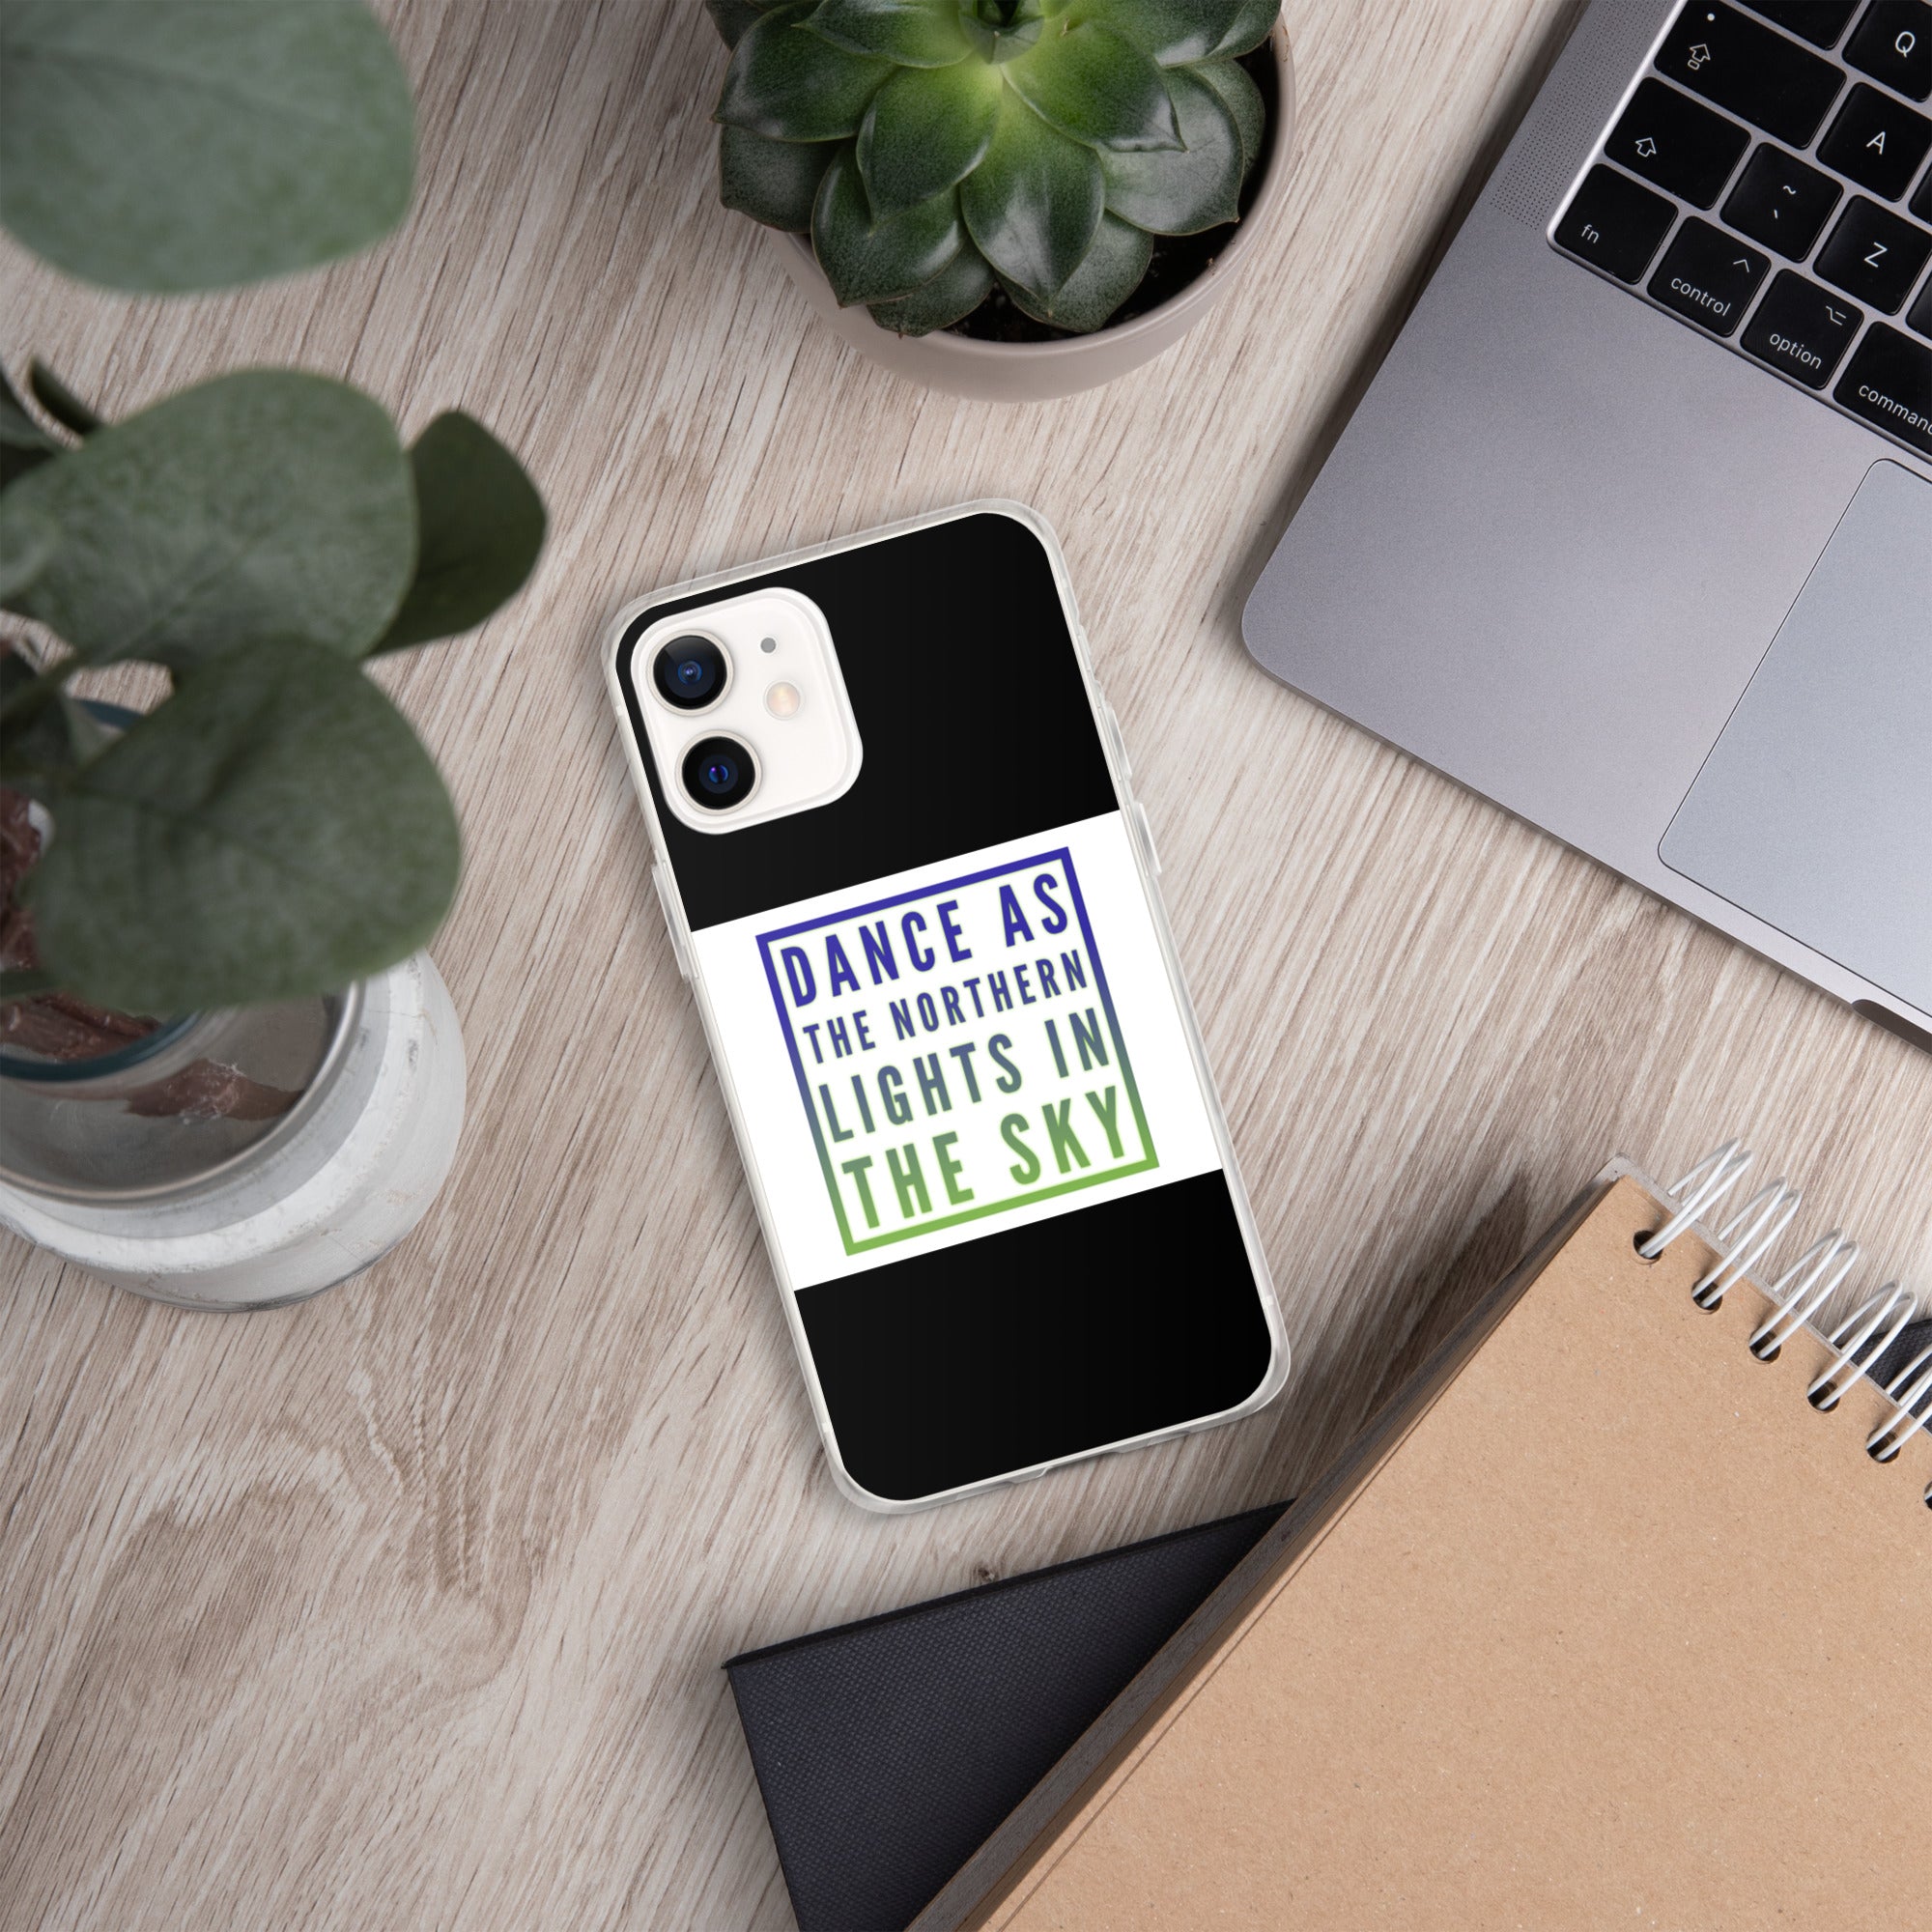 GloWell Designs - iPhone Case - Motivational Quote - Dance As The Northern Lights - GloWell Designs